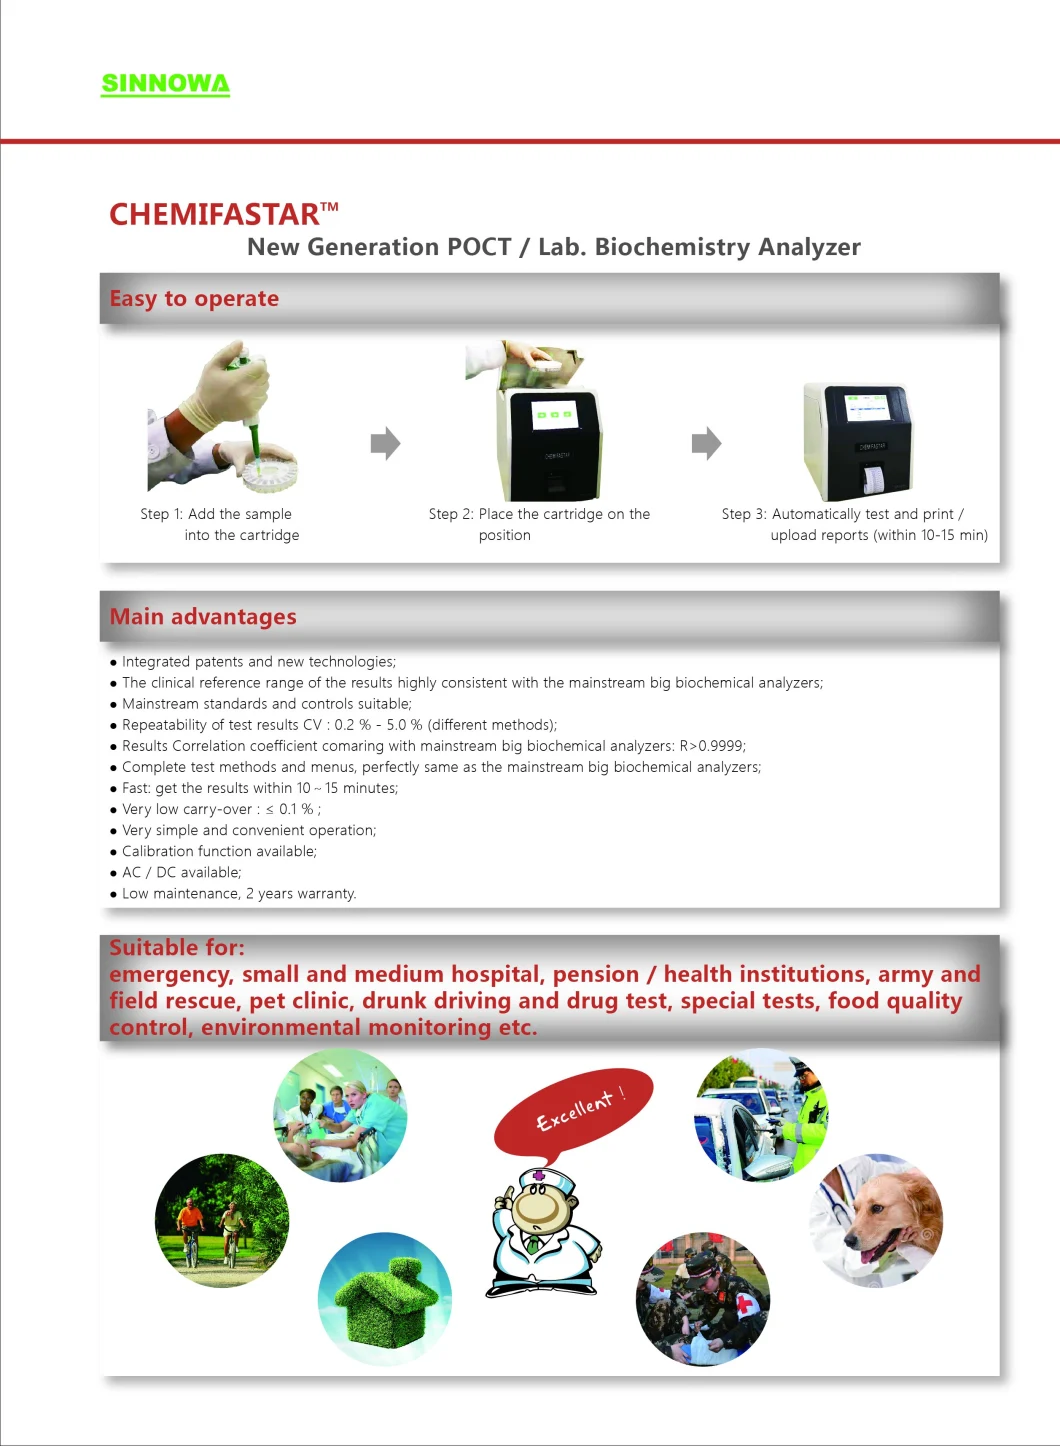 Poct Chemistry Analyzer Mini Fully Automatic Biochemistry Analyzer for Poc Test Chemifastar Easy to Use with Accurate Results